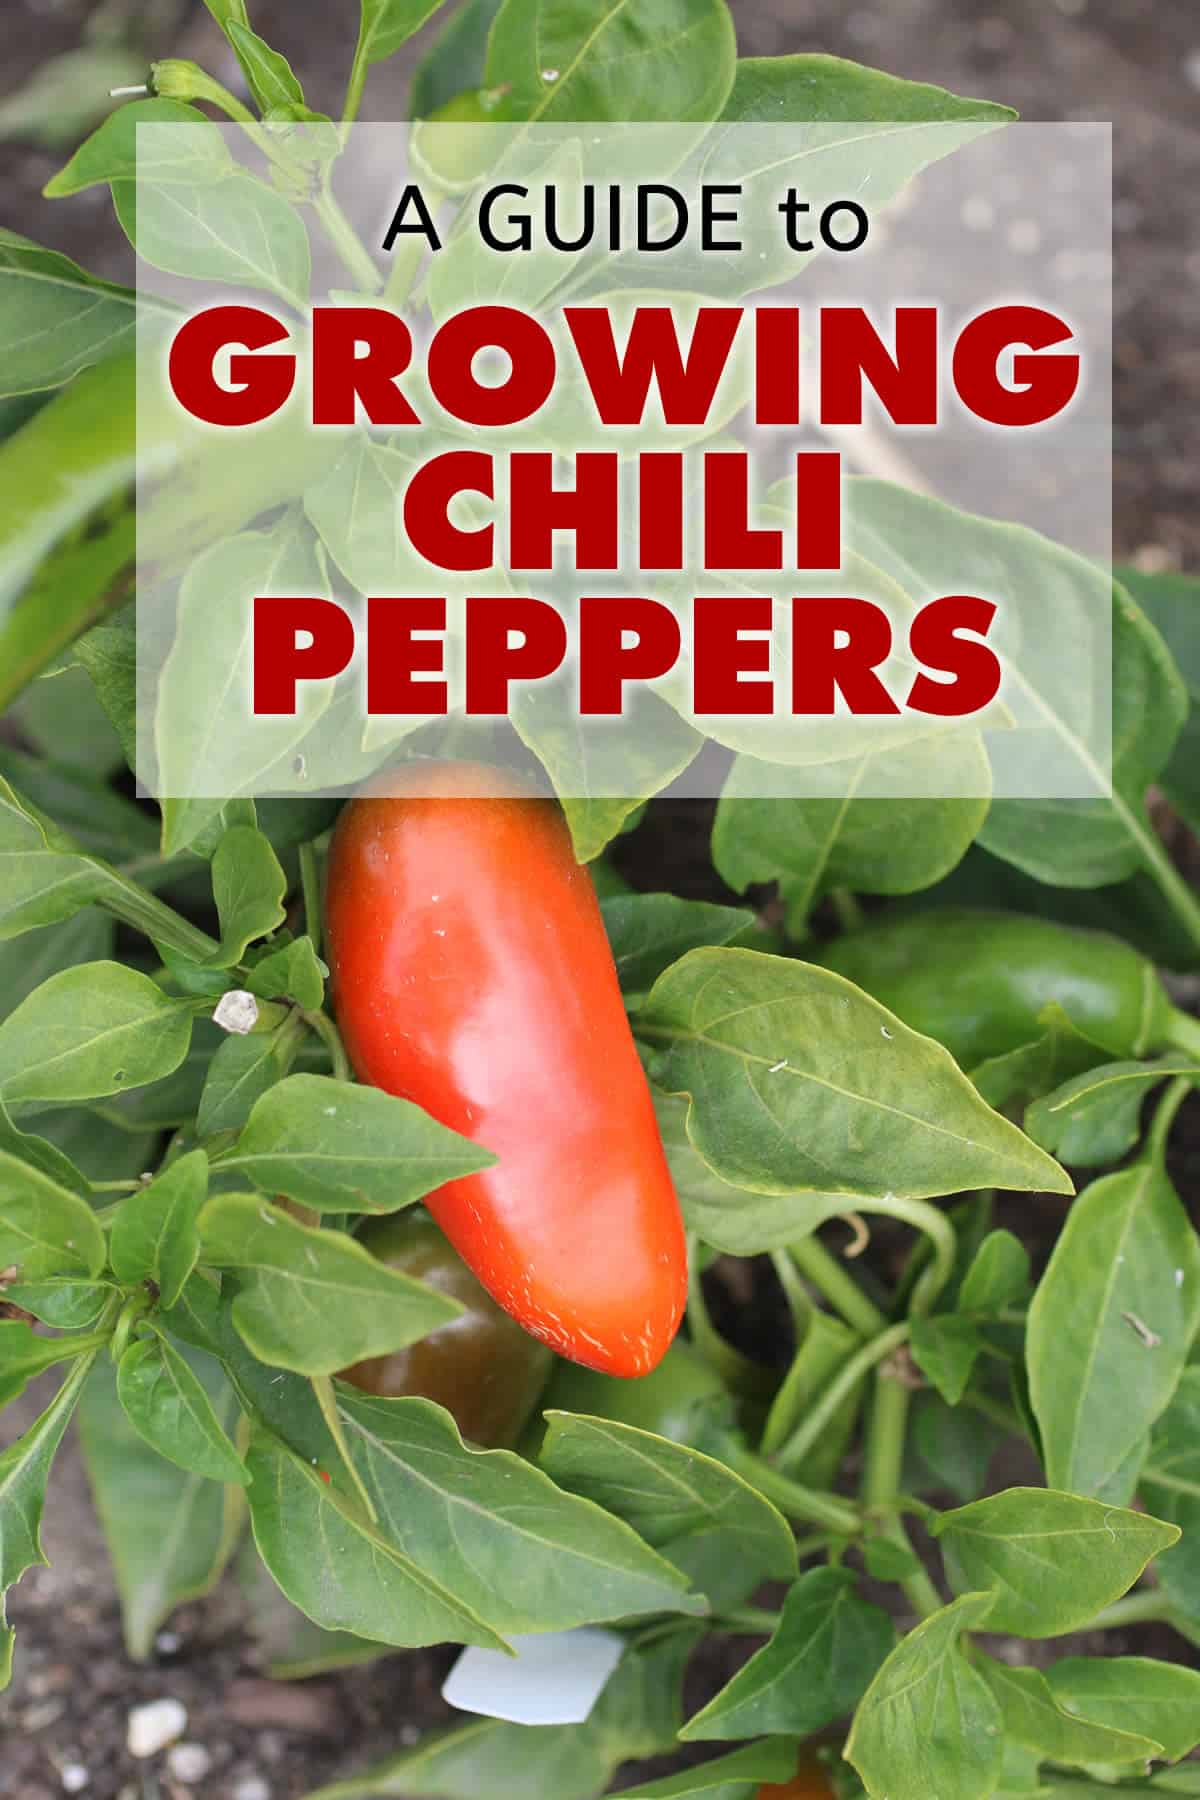 A Guide to Growing Chili Peppers